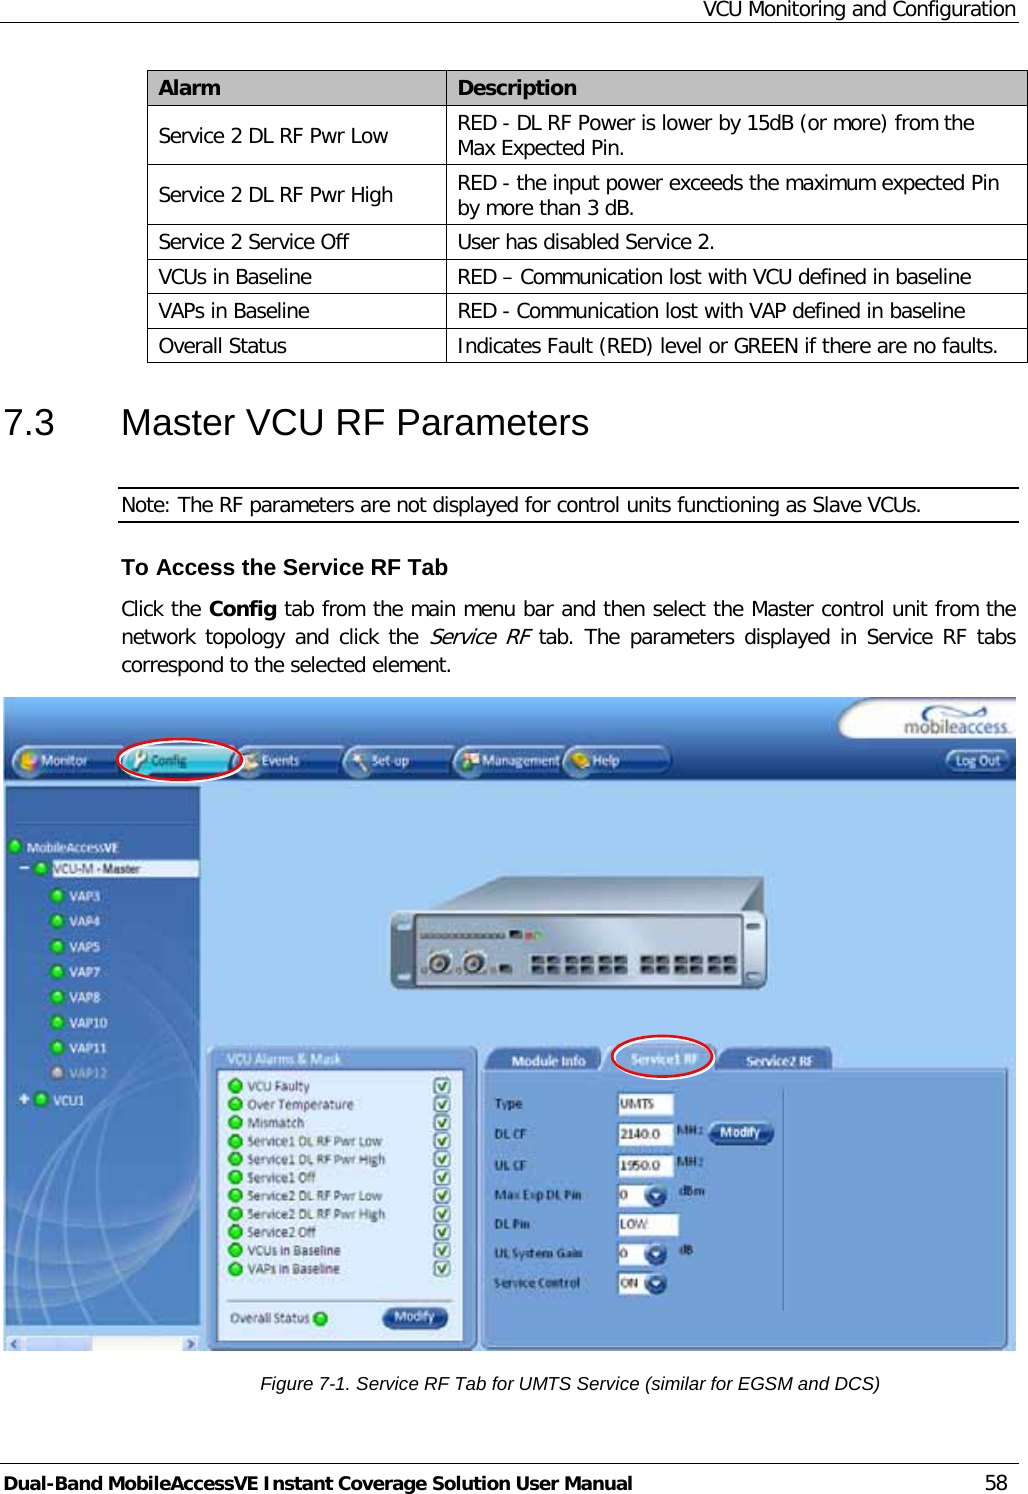 VCU Monitoring and Configuration Dual-Band MobileAccessVE Instant Coverage Solution User Manual 58 Alarm Description Service 2 DL RF Pwr Low RED - DL RF Power is lower by 15dB (or more) from the Max Expected Pin. Service 2 DL RF Pwr High RED - the input power exceeds the maximum expected Pin by more than 3 dB.  Service 2 Service Off User has disabled Service 2. VCUs in Baseline RED – Communication lost with VCU defined in baseline  VAPs in Baseline RED - Communication lost with VAP defined in baseline Overall Status Indicates Fault (RED) level or GREEN if there are no faults. 7.3  Master VCU RF Parameters Note: The RF parameters are not displayed for control units functioning as Slave VCUs.  To Access the Service RF Tab Click the Config tab from the main menu bar and then select the Master control unit from the network topology and click the Service RF tab. The parameters displayed in Service RF tabs correspond to the selected element.  Figure  7-1. Service RF Tab for UMTS Service (similar for EGSM and DCS) 